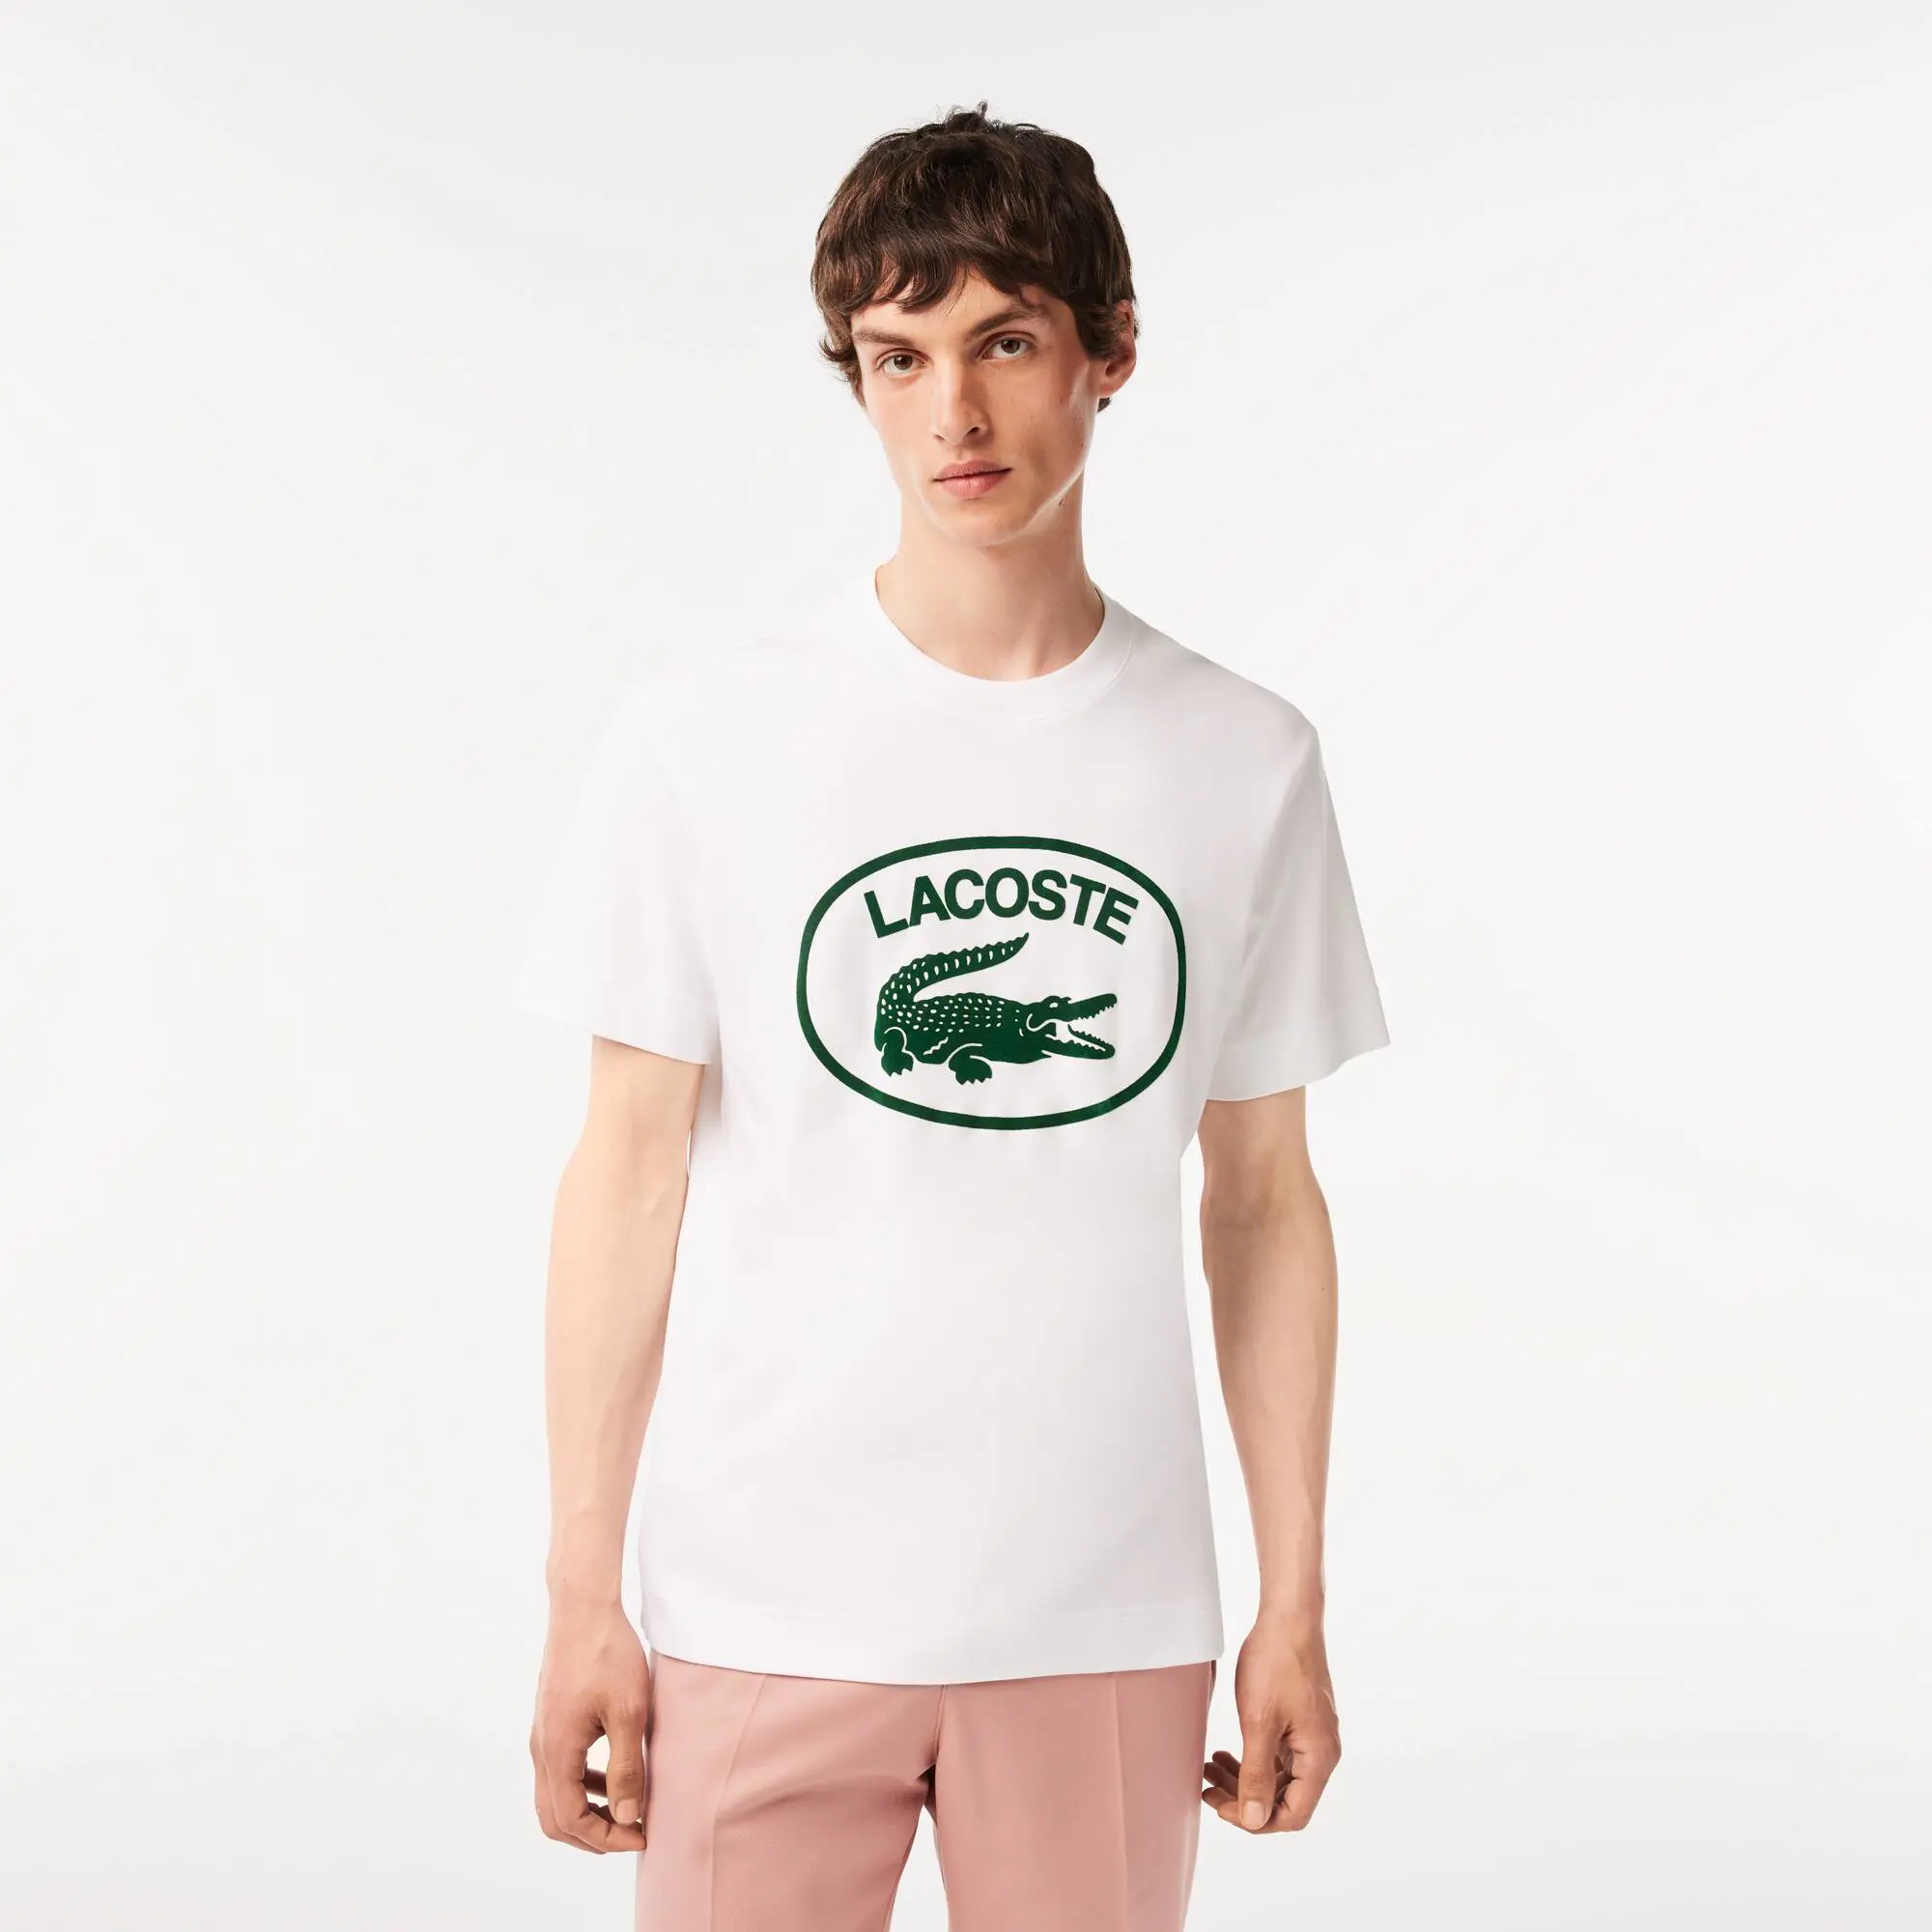 Lacoste T-shirt homme Lacoste relaxed fit marquage en coton. 1